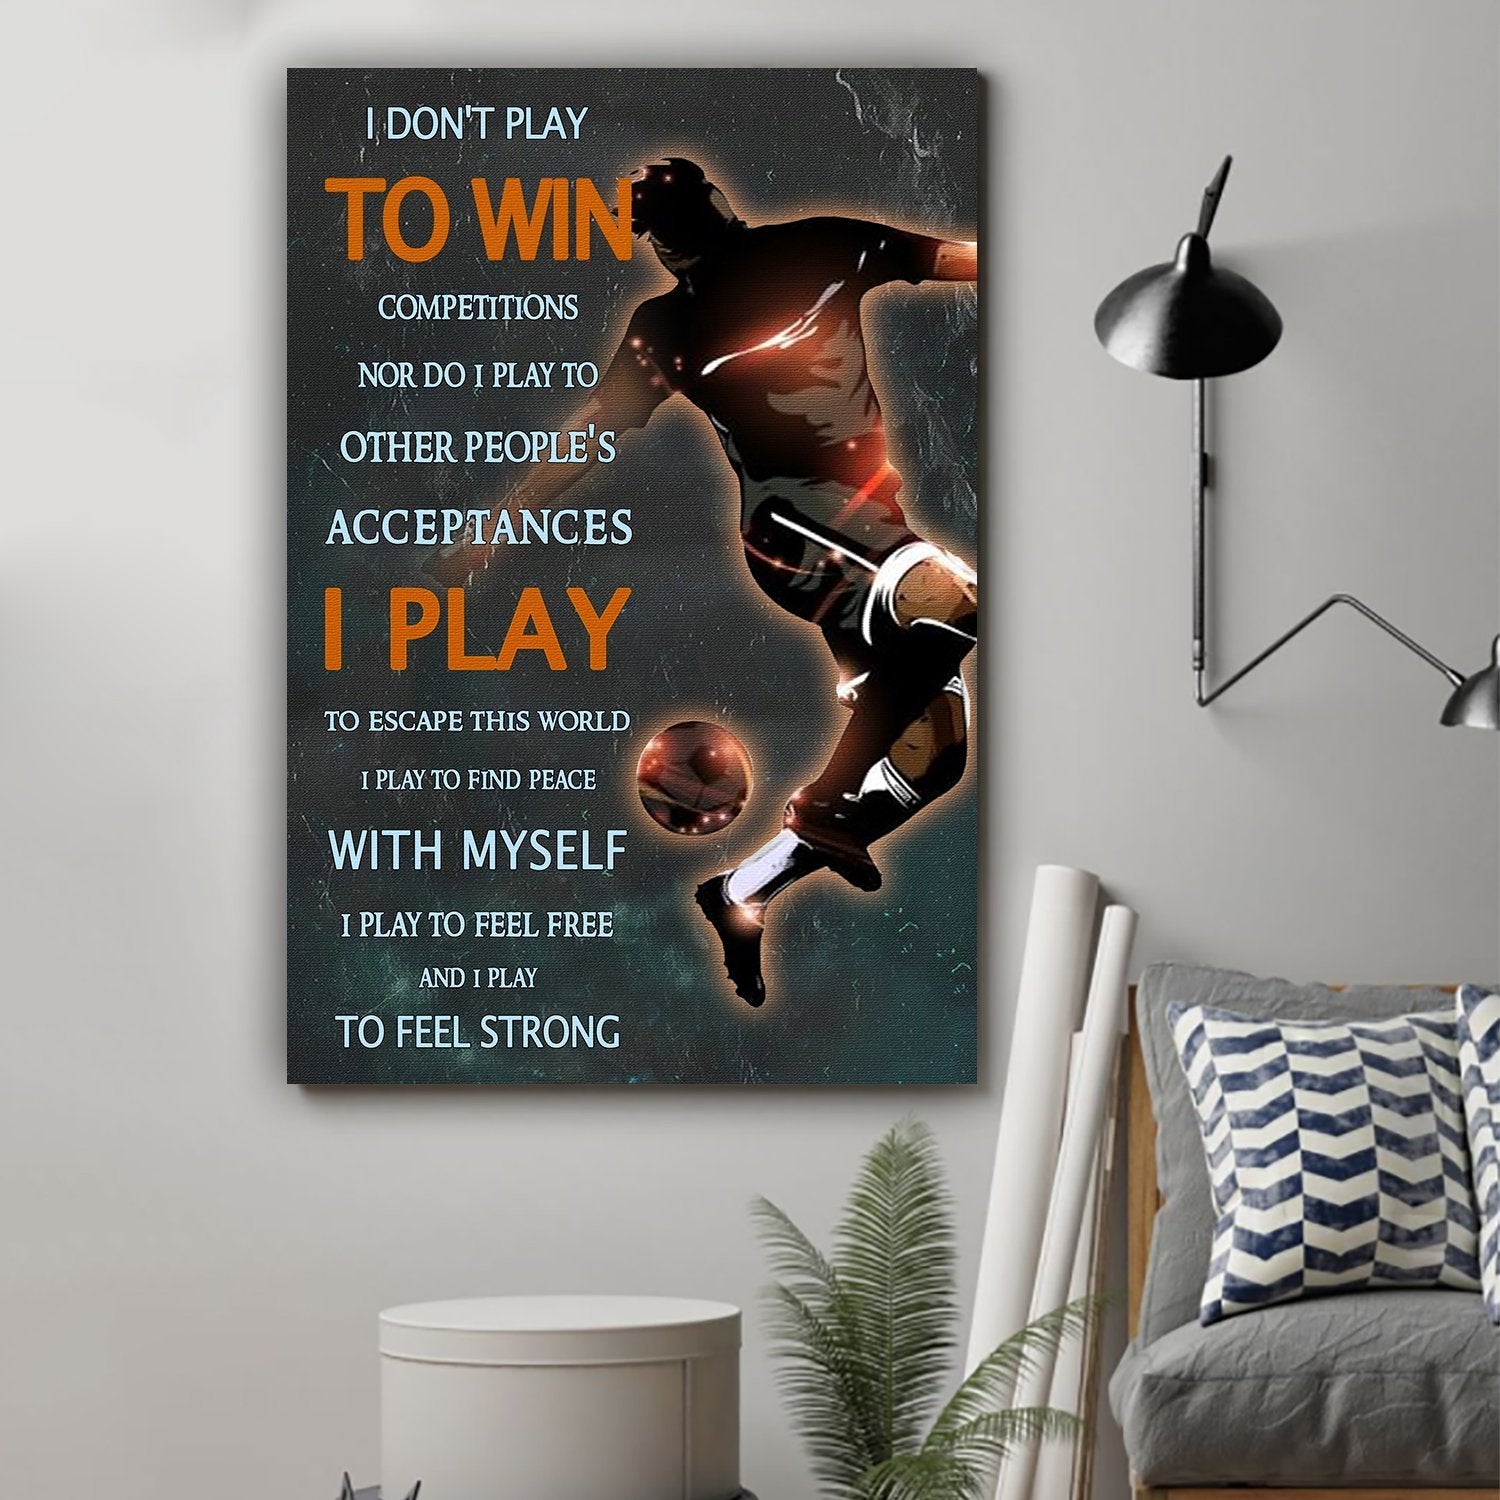 Soccer Canvas and Poster ��� I dont play to win competitions wall decor visual art - GIFTCUSTOM